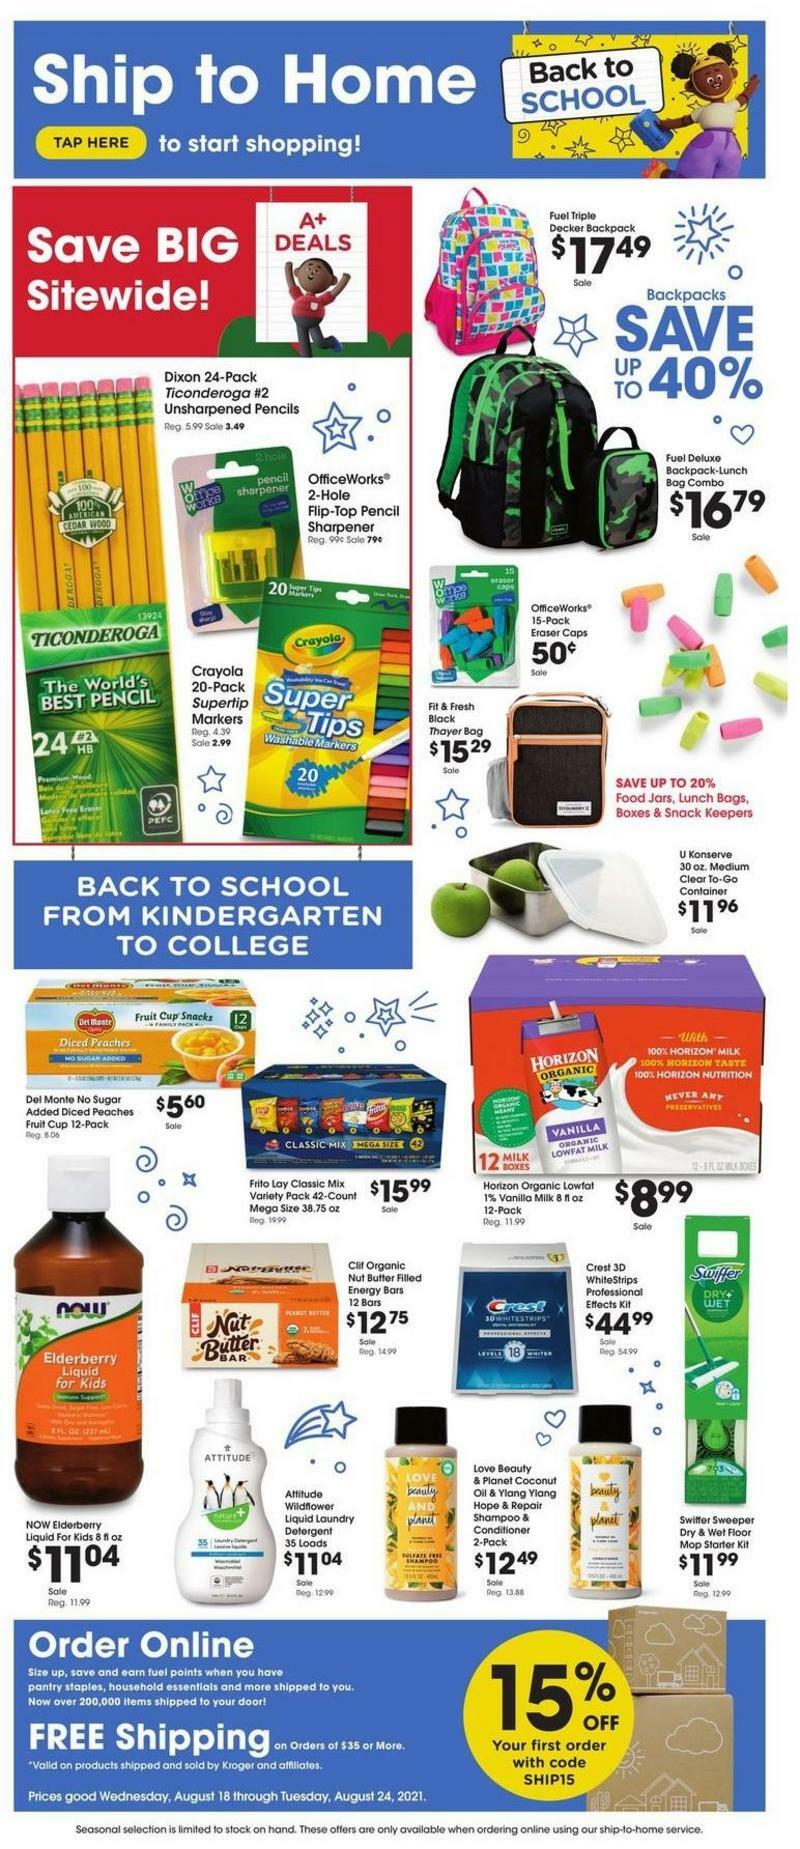 Fred Meyer Ship to Home Weekly Ad from August 18